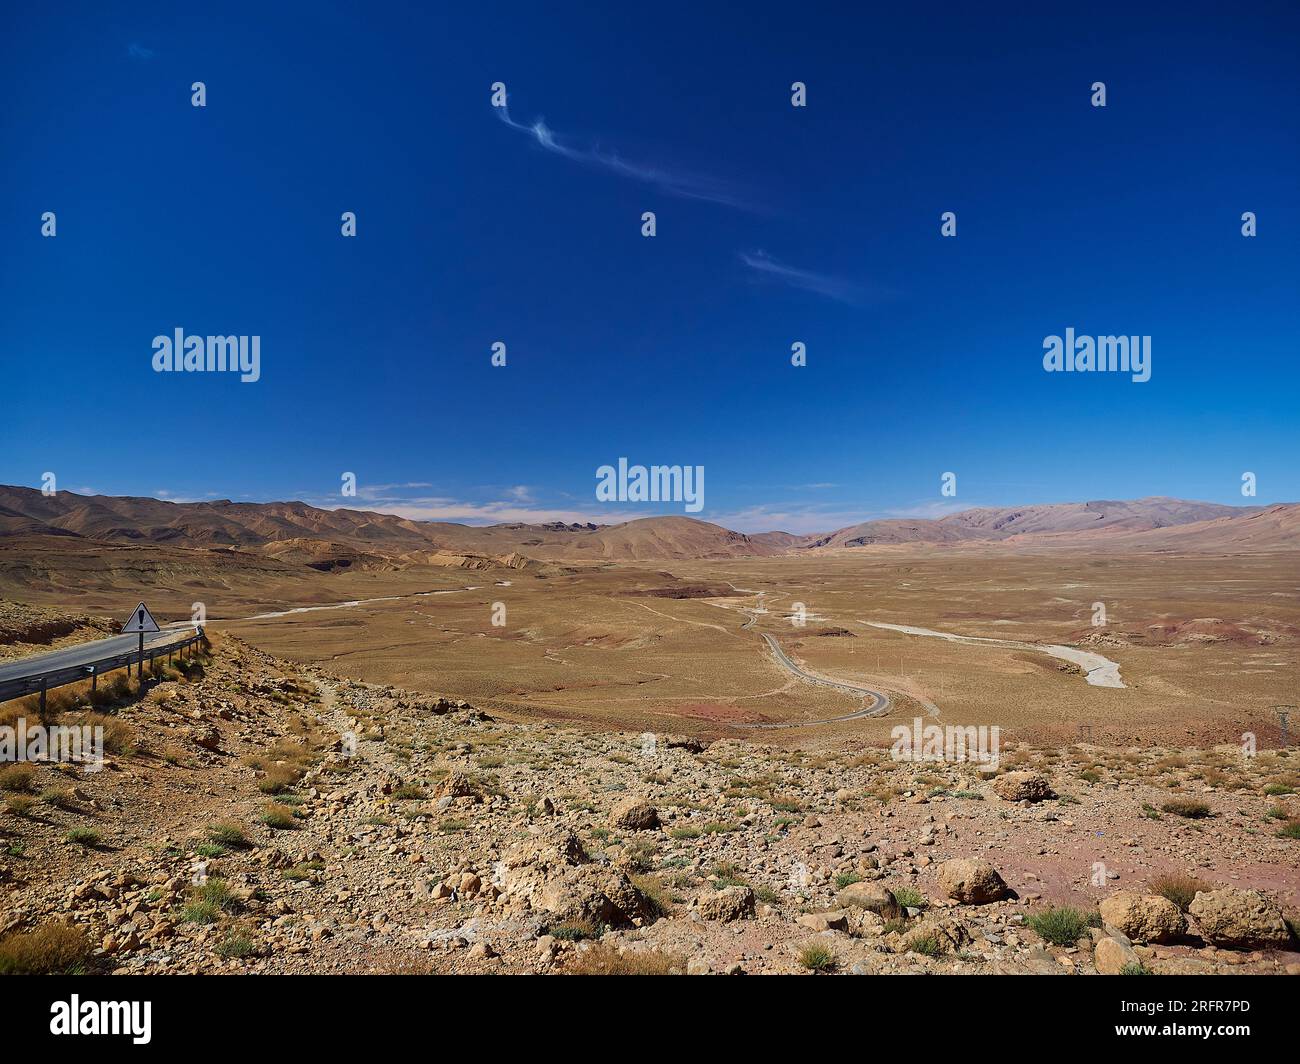 Dry and arid deserted region in a desert landscape in the mountains of Morocco in northern Africa. Stock Photo